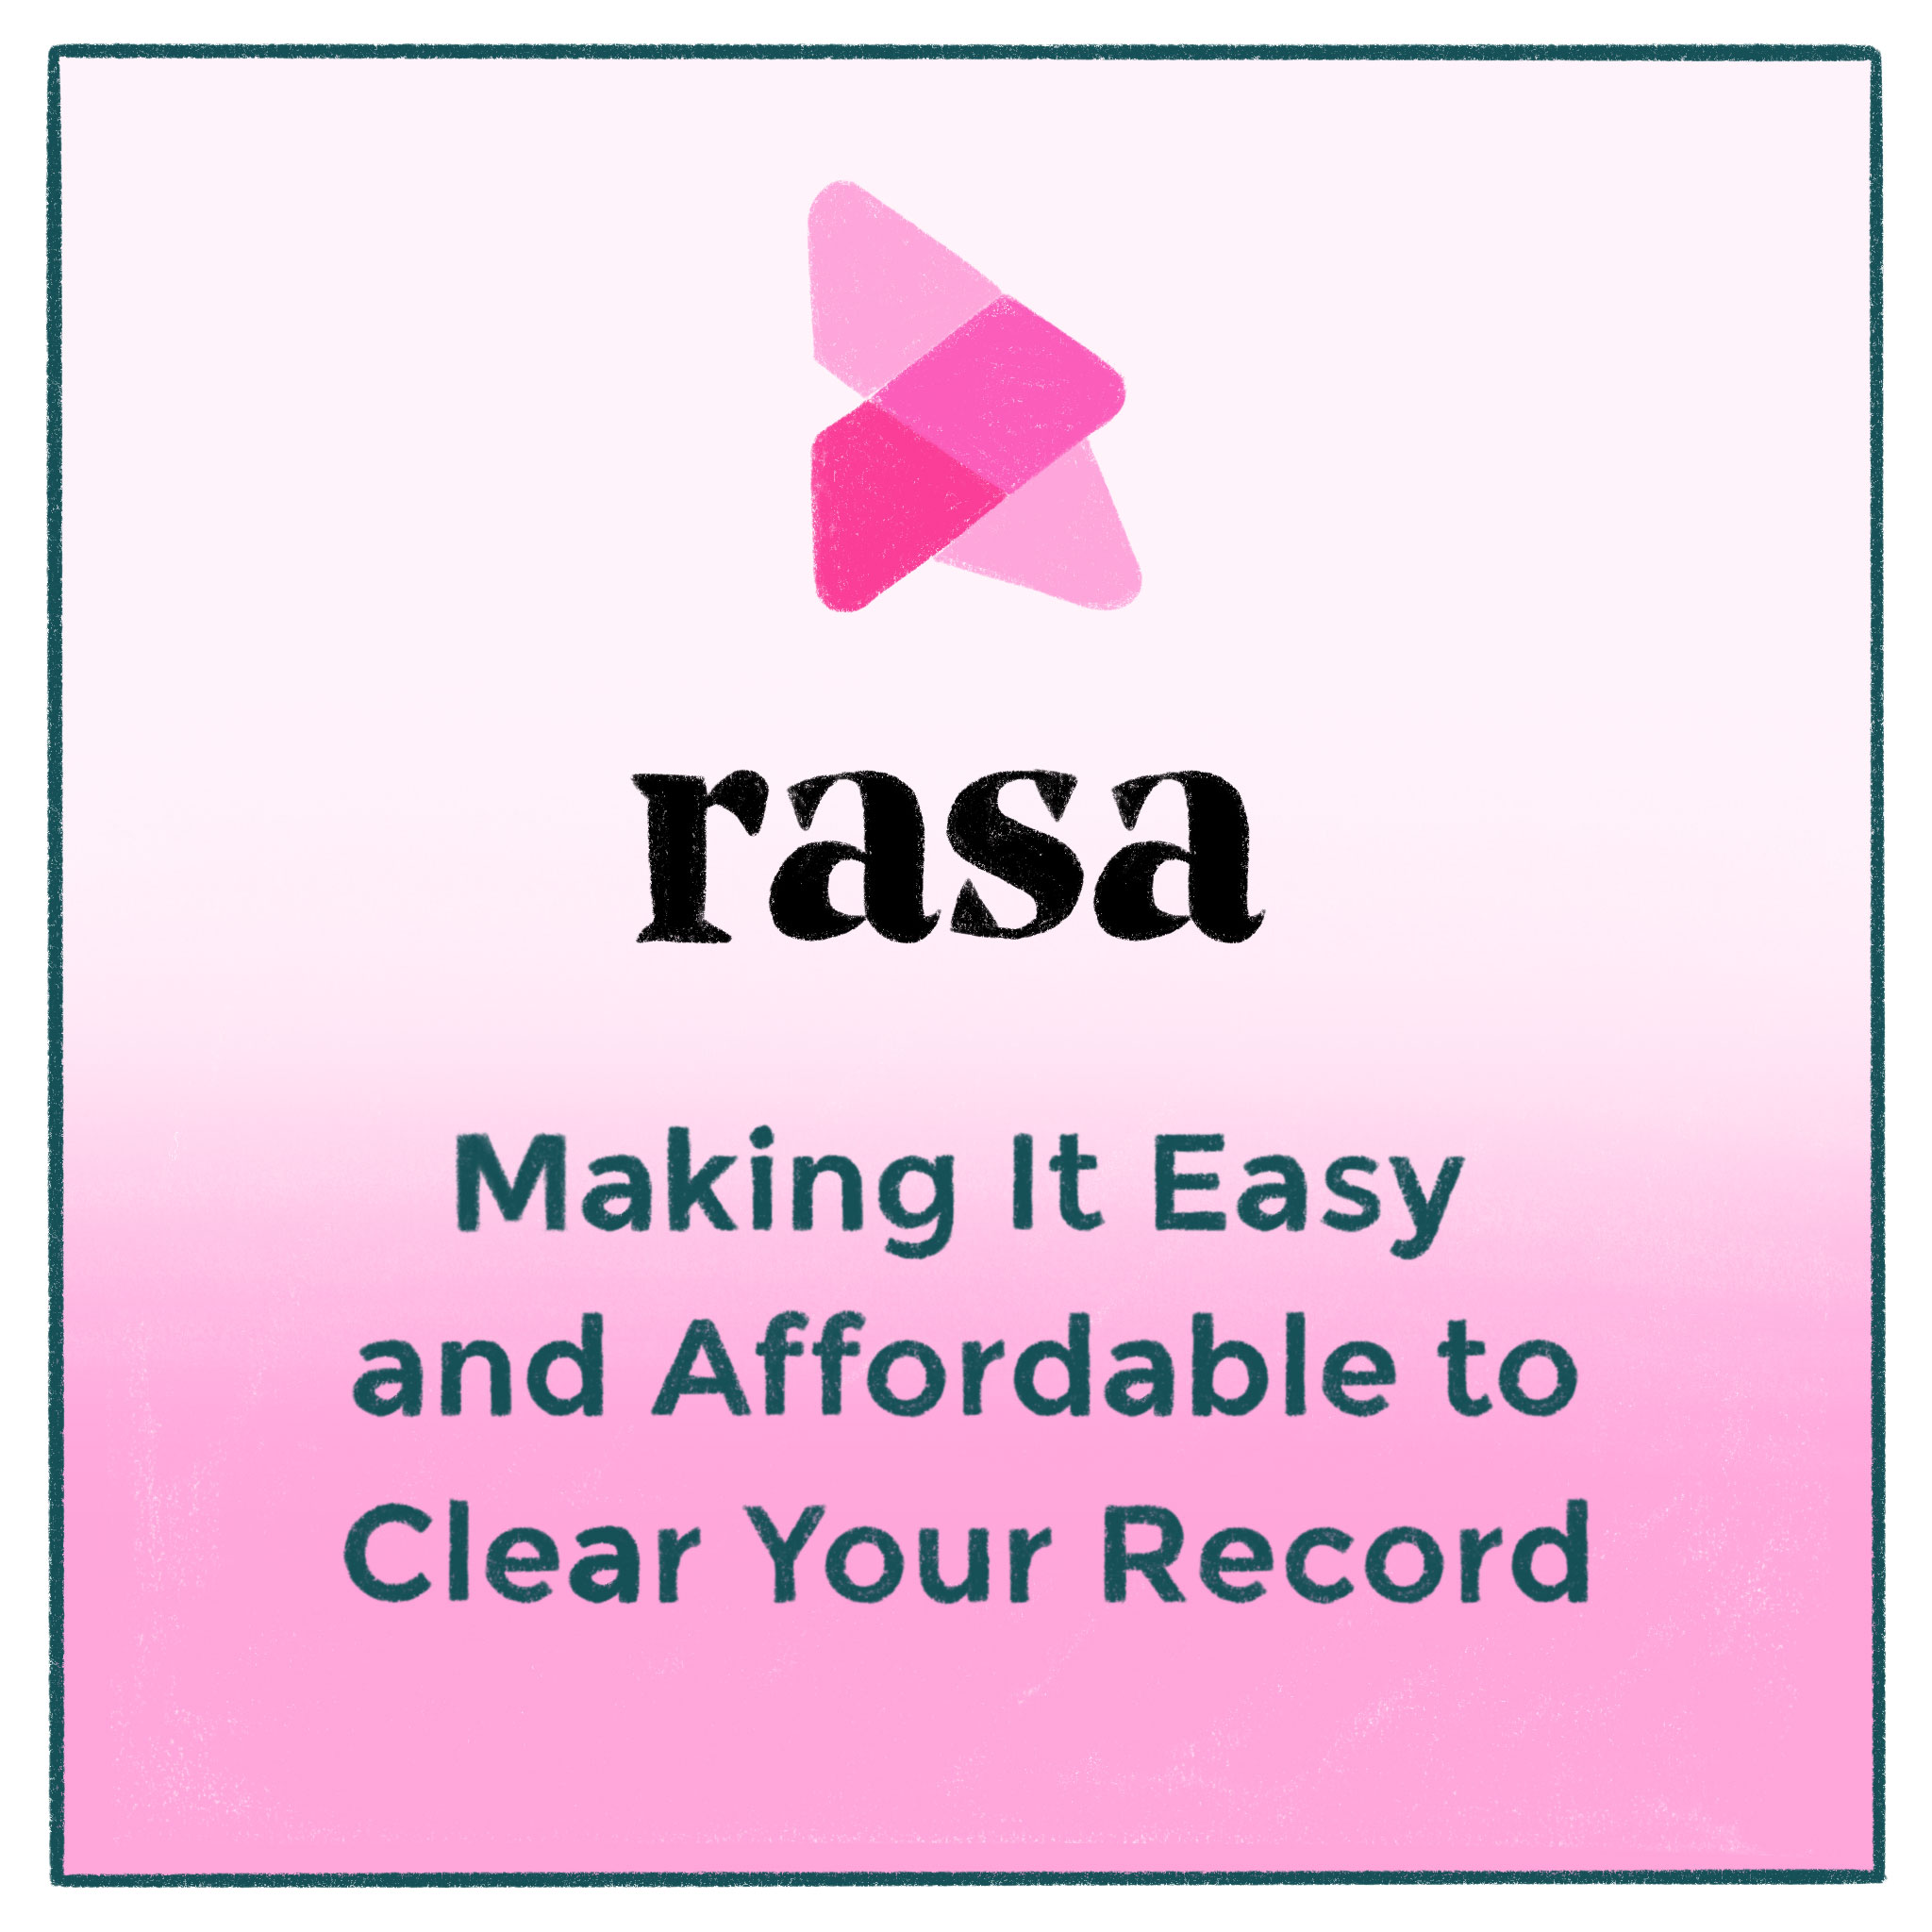 Image: Illustrated Rasa logo: Making It Easy and Affordable to Clear Your Record 